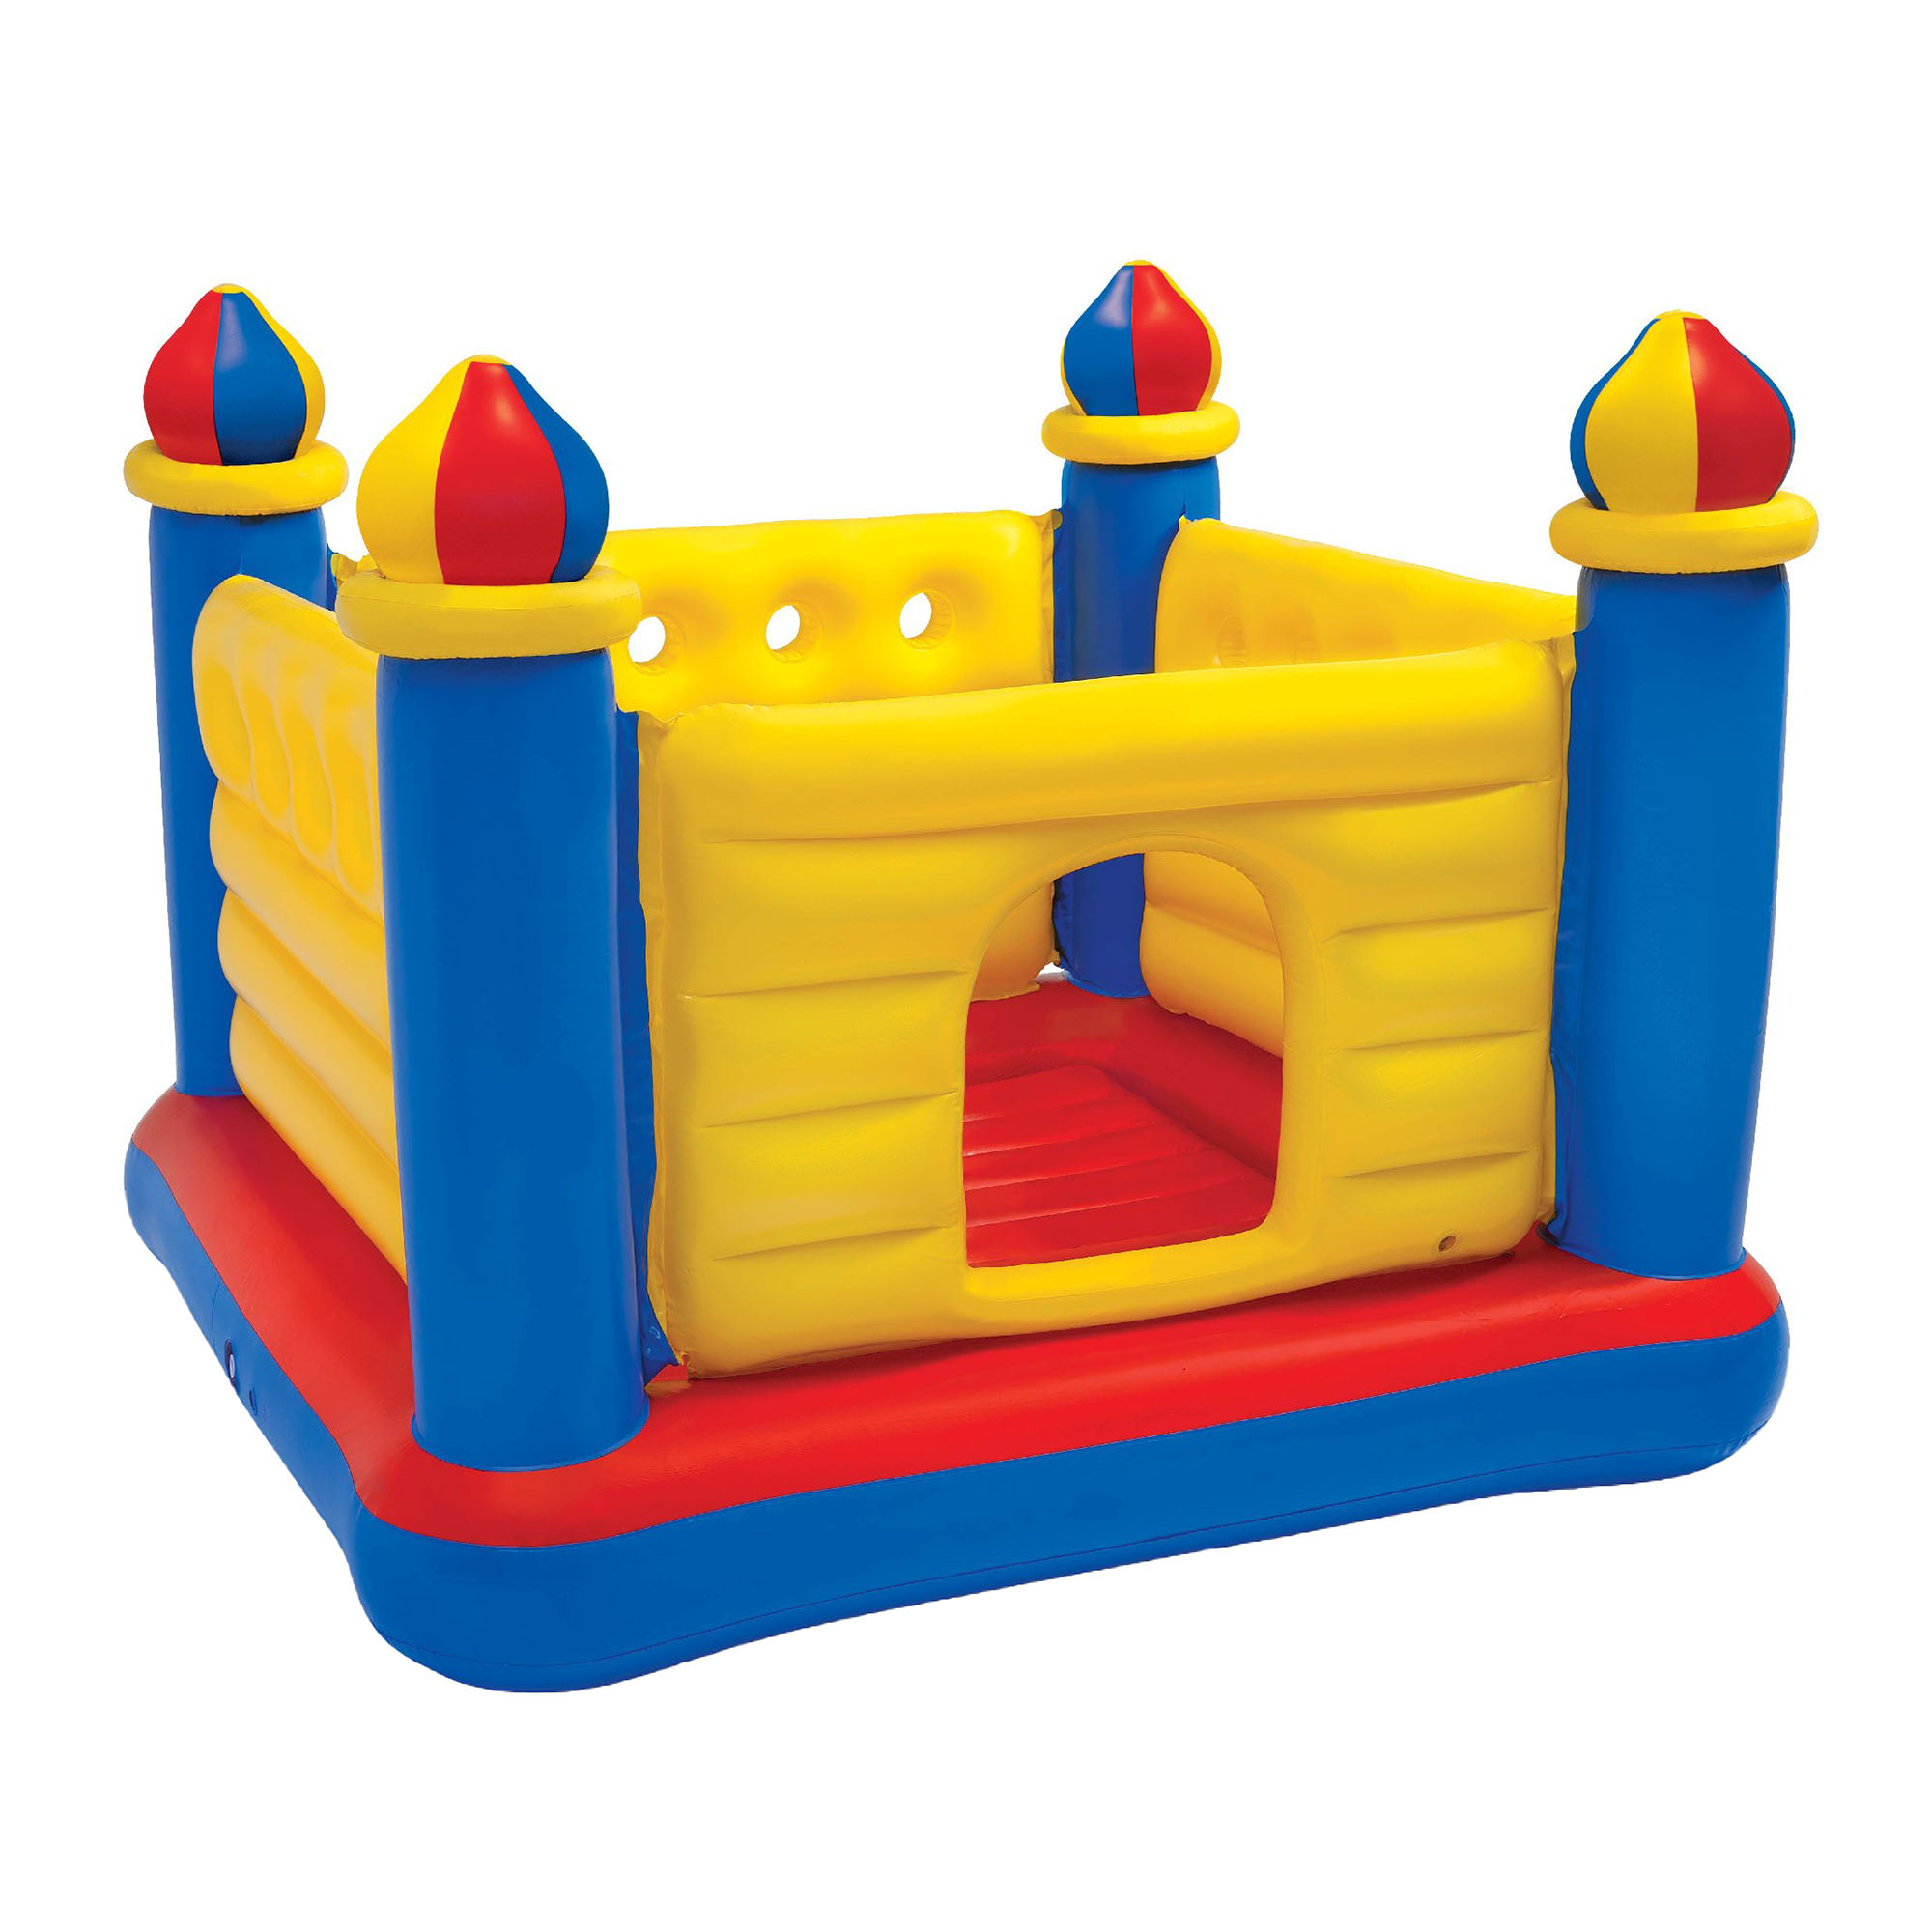 Intex Inflatable Colorful Jump-O-Lene Kids Ball Pit Castle Bouncer for Ages 3-6 - image 1 of 7